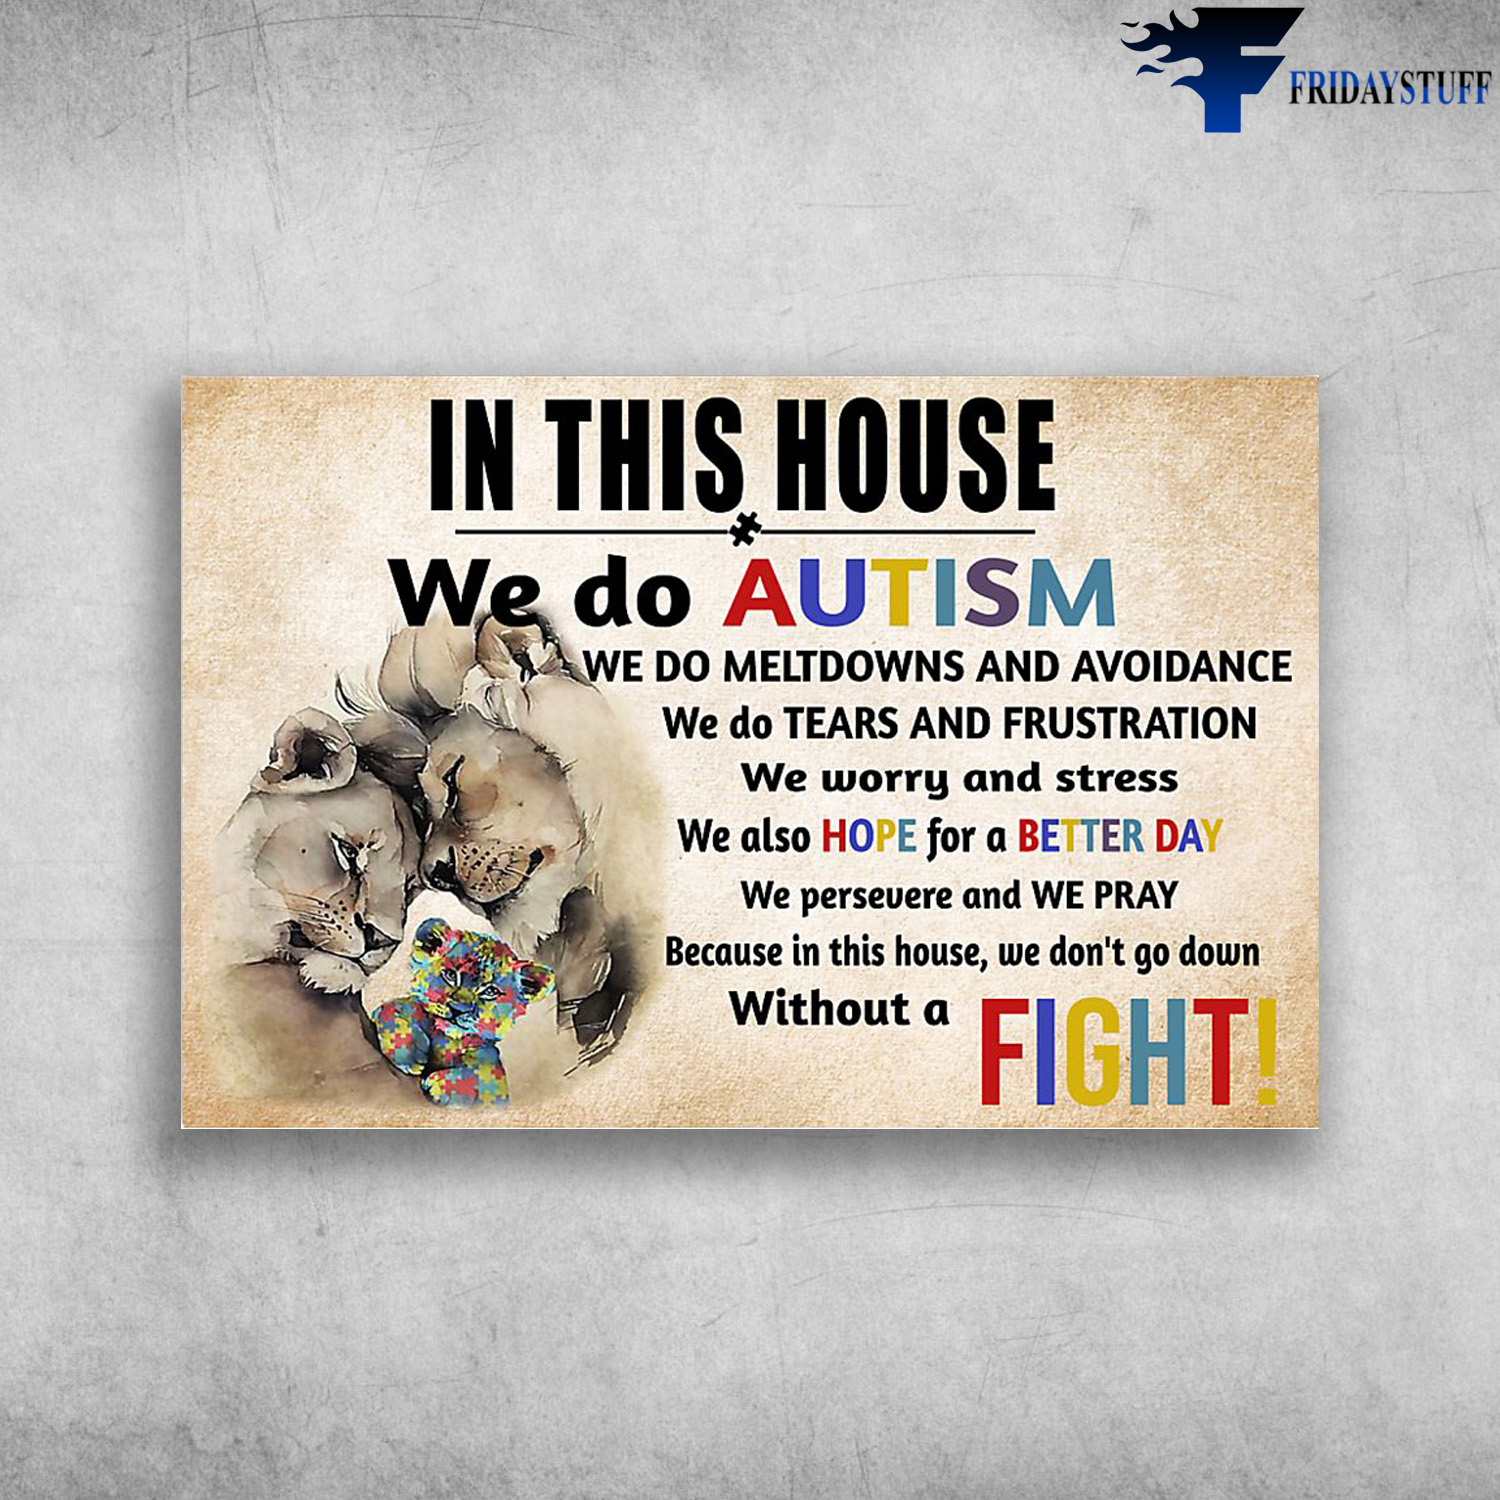 Lion family - In This House, We Do Autism, We Do Lentdowns And Avoidance